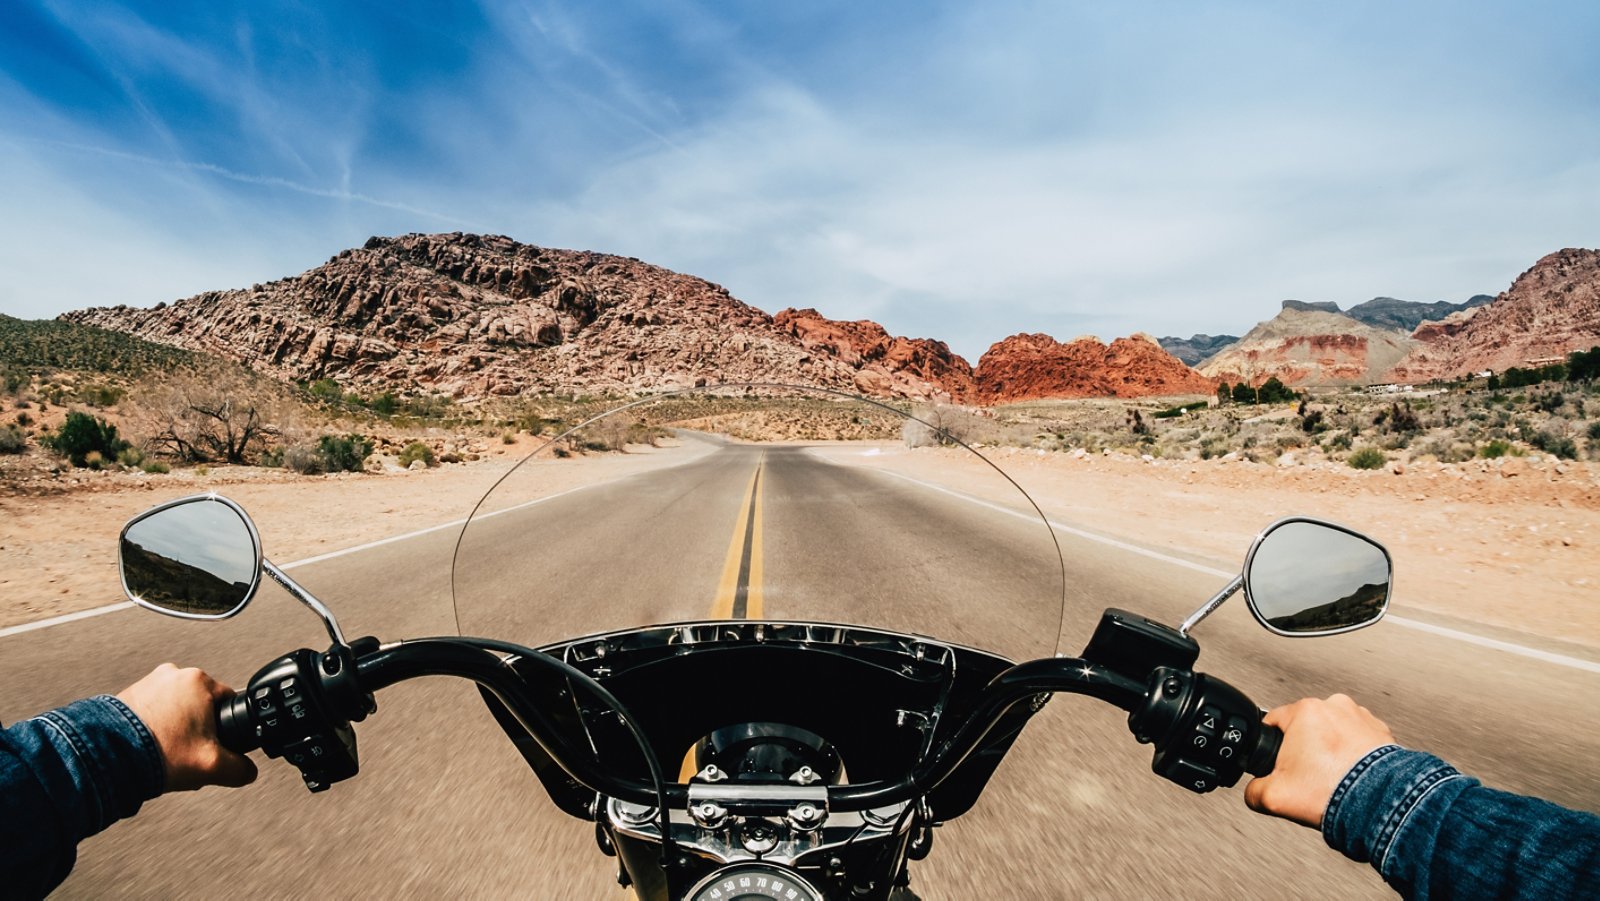 First person view of a man driving a motorcycle on a road